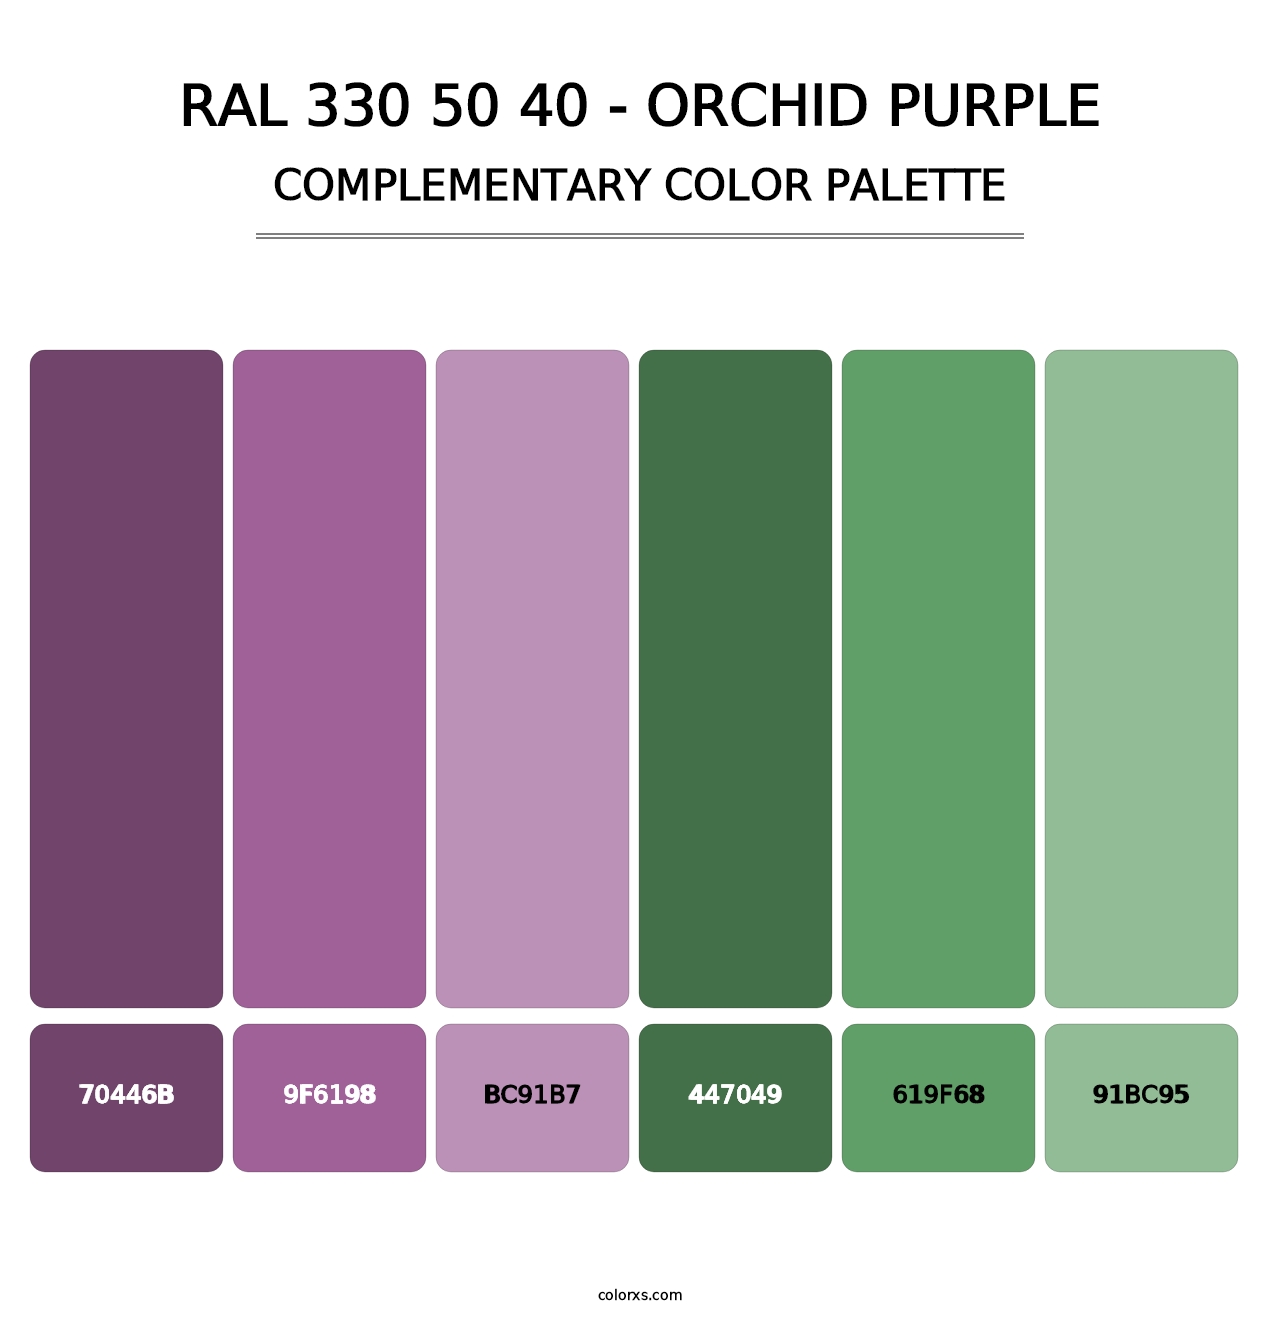 RAL 330 50 40 - Orchid Purple - Complementary Color Palette